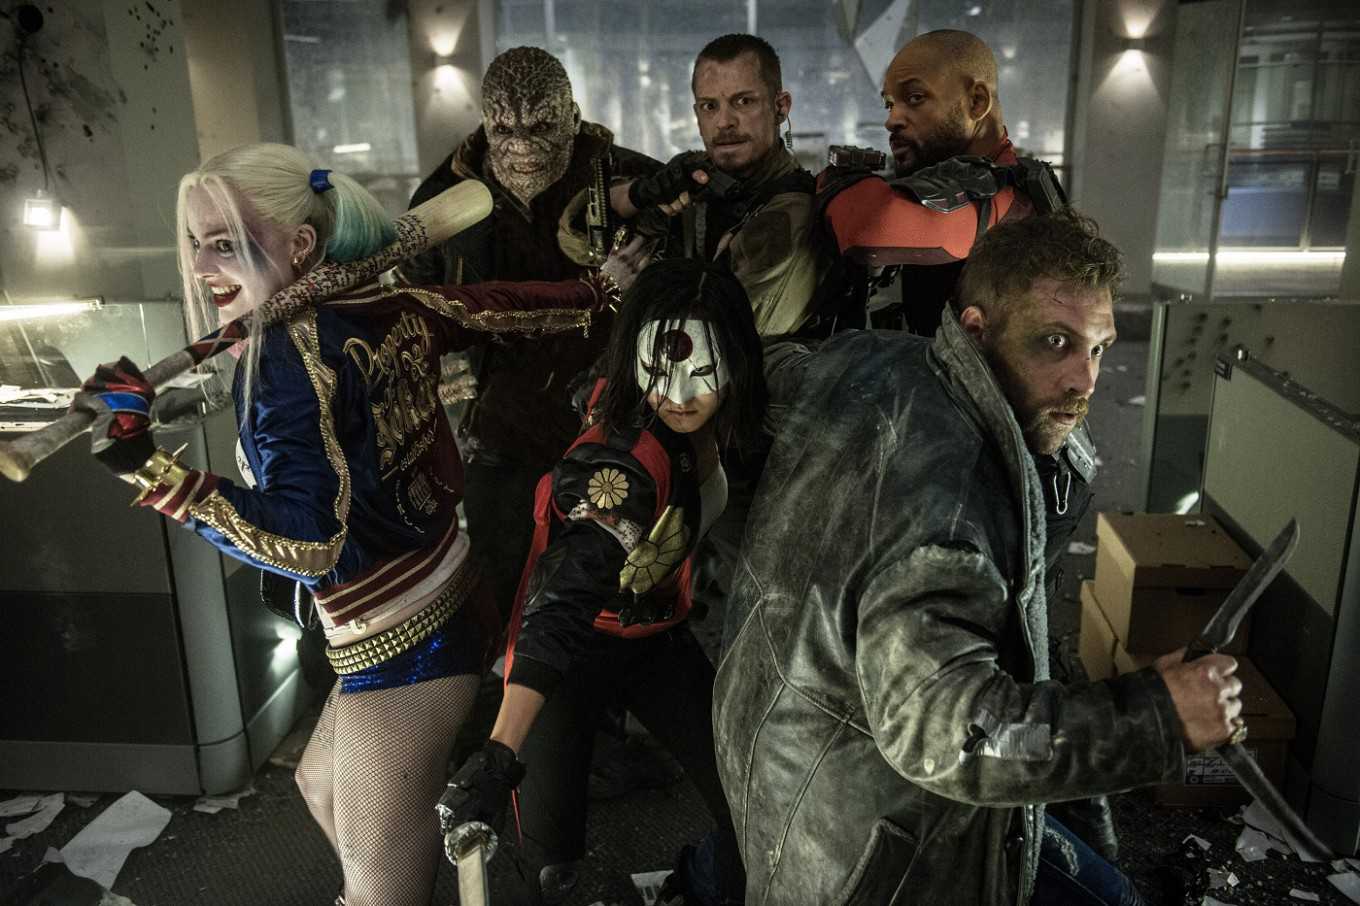 'The Suicide Squad' seeks redemption for DC supervillains -- and director